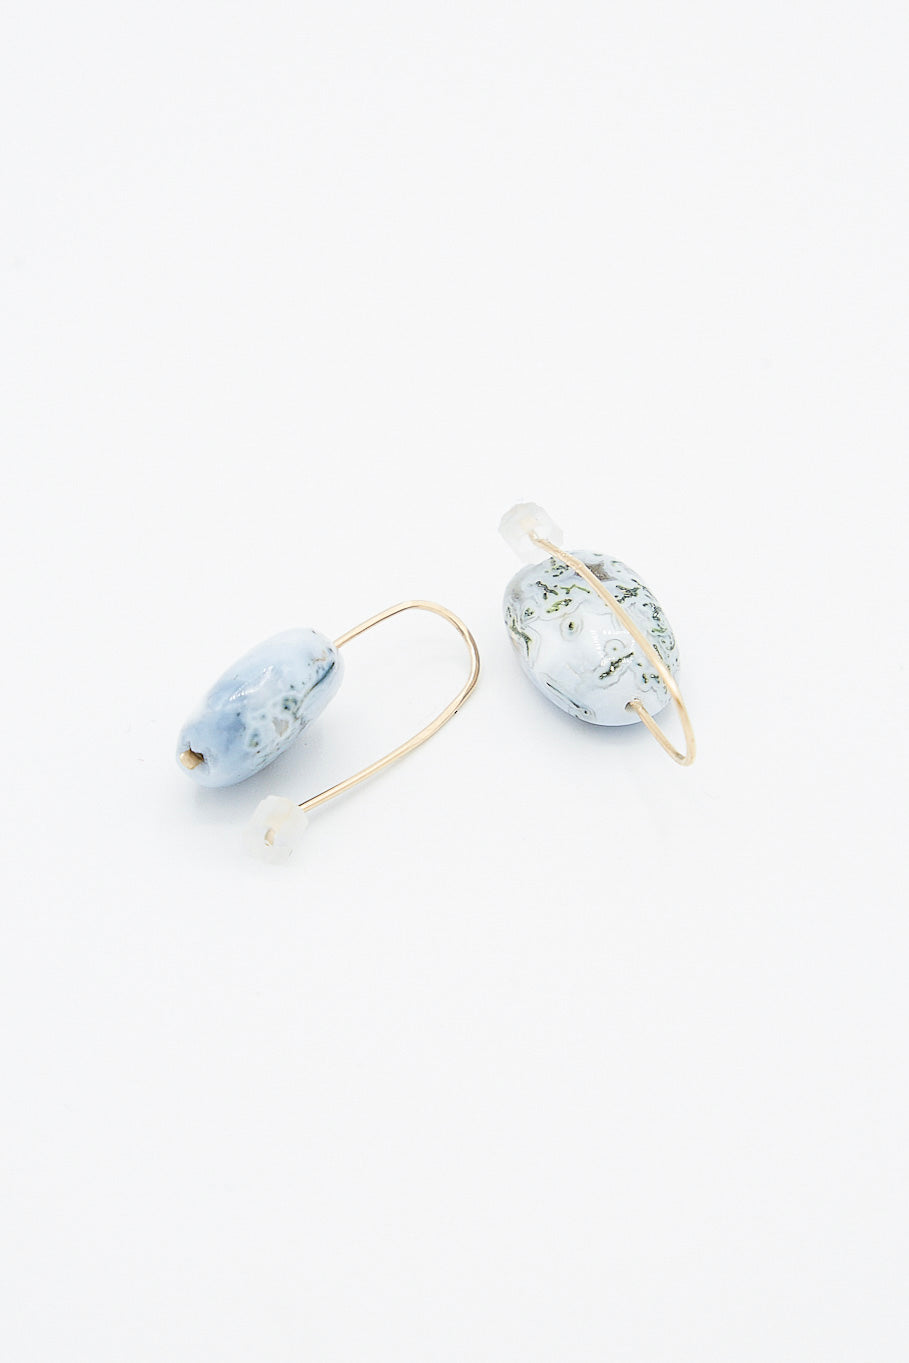 A pair of Mary MacGill Drop Earrings in Textured Blue Opal on a white surface. 14K Gold-Filled Wire.